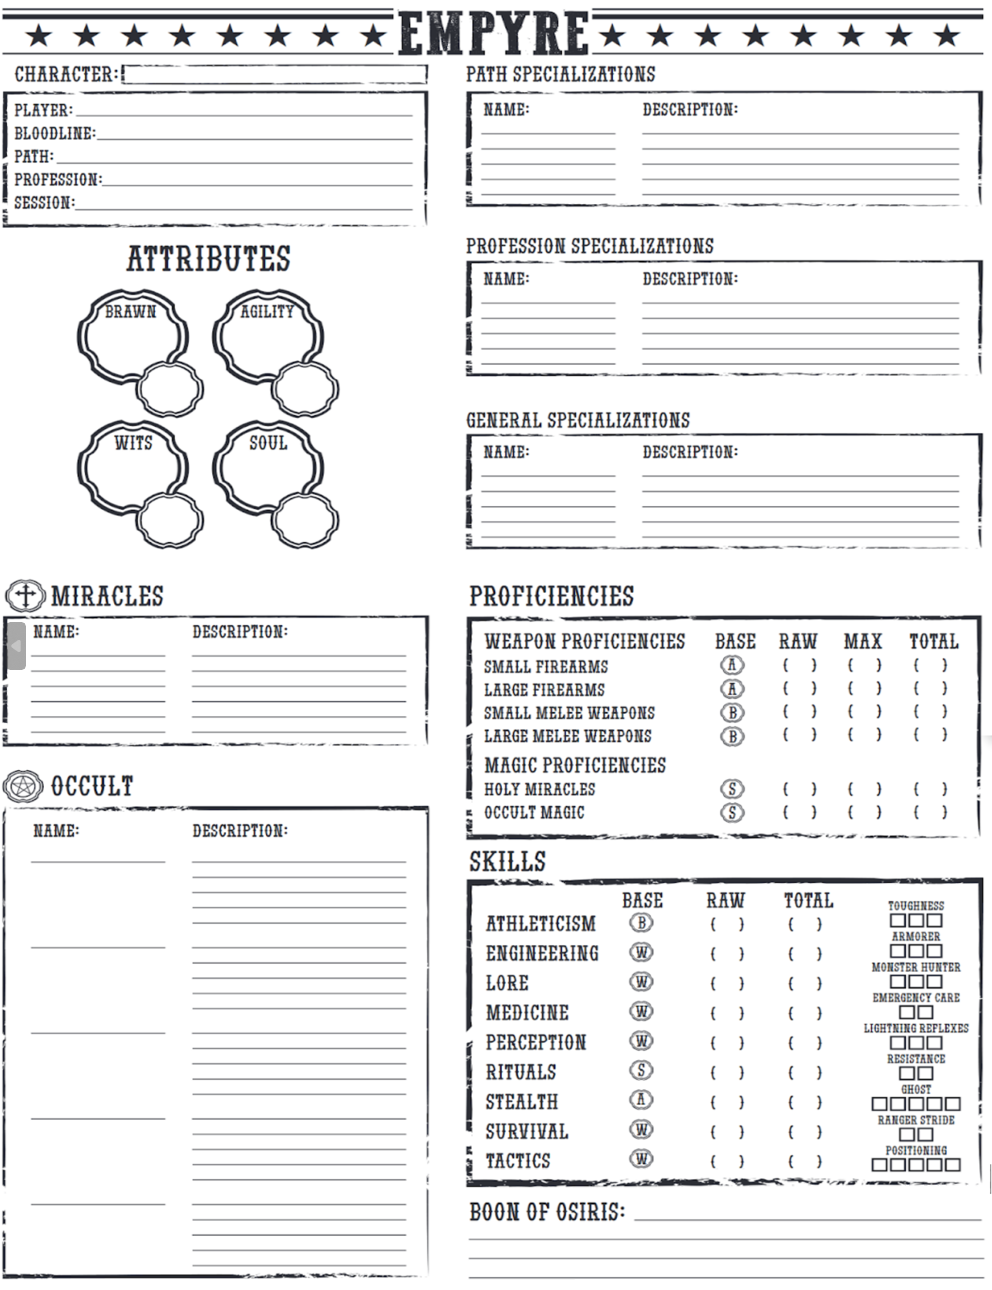 The old character sheet with minor touch ups